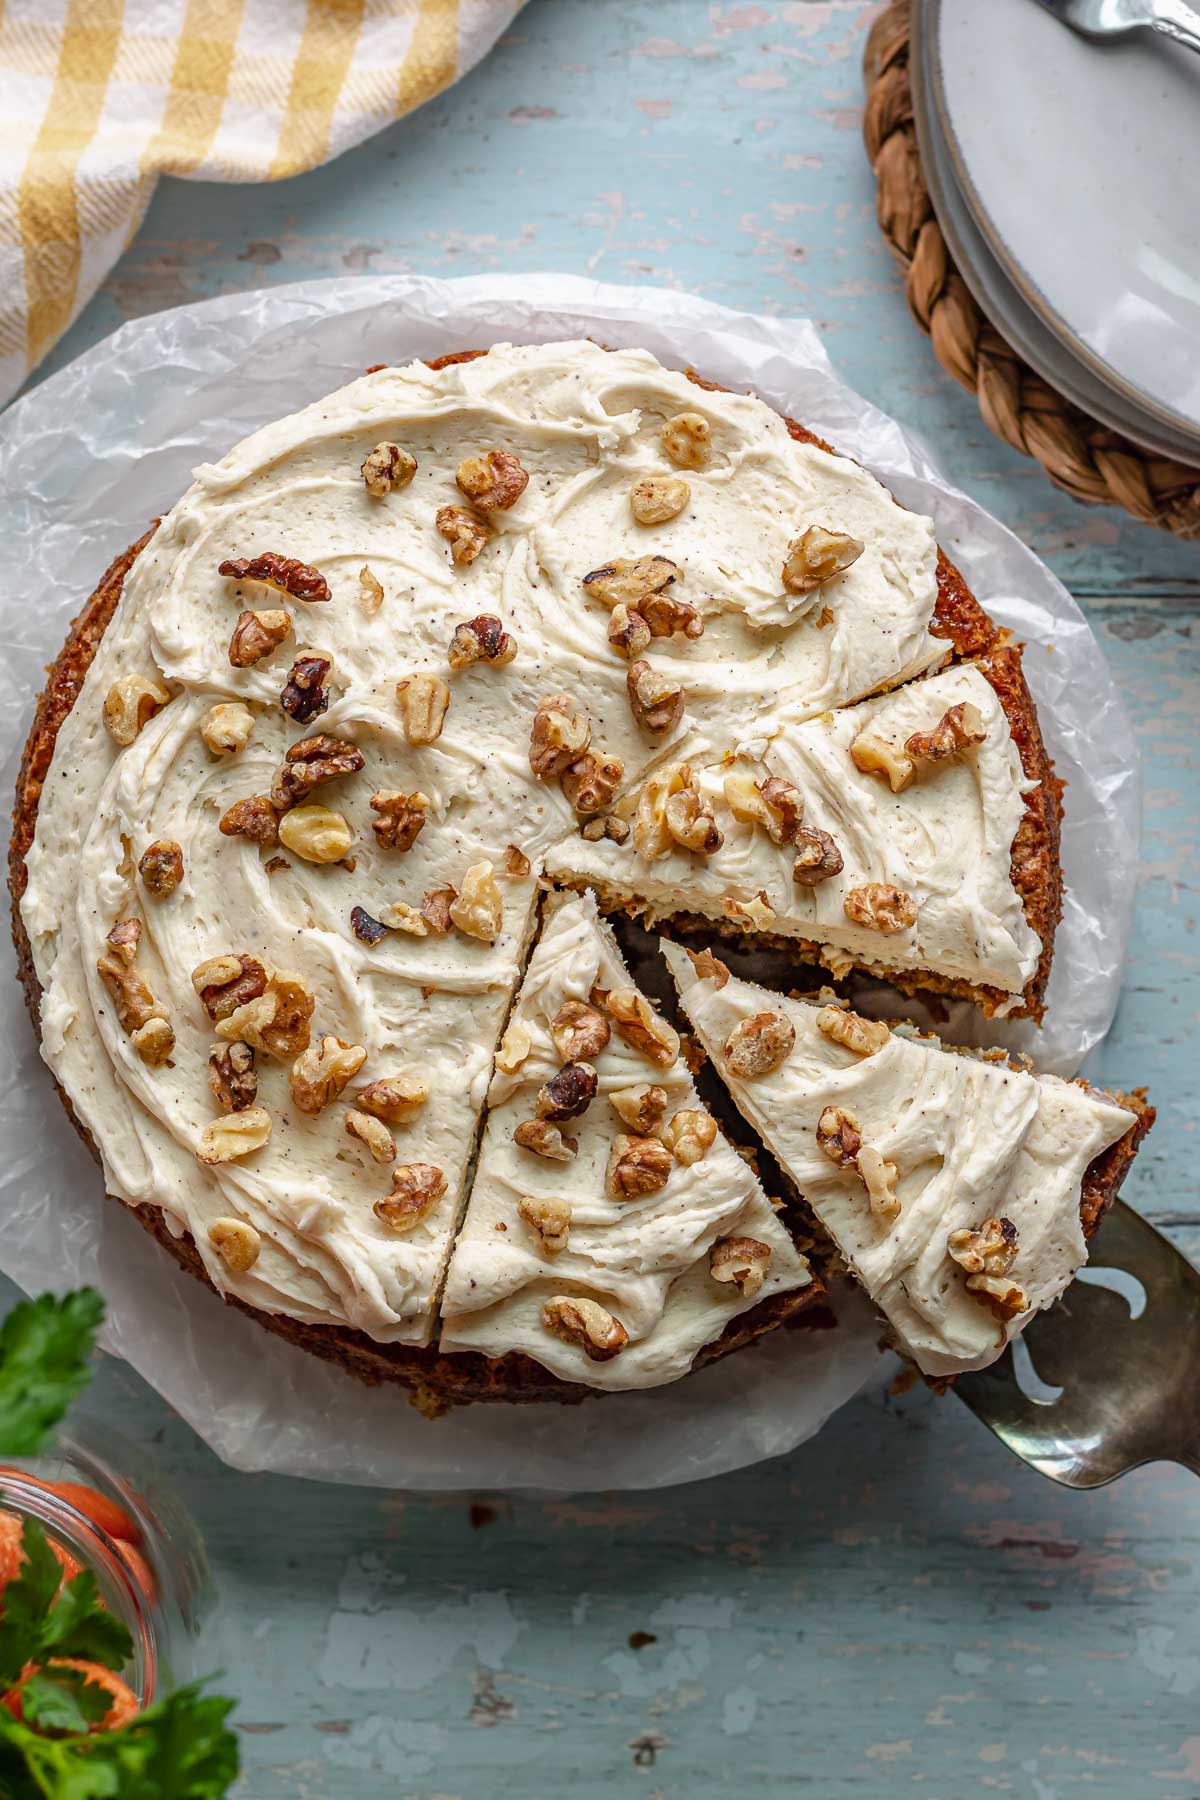 Carrot cake with a slice being removed.